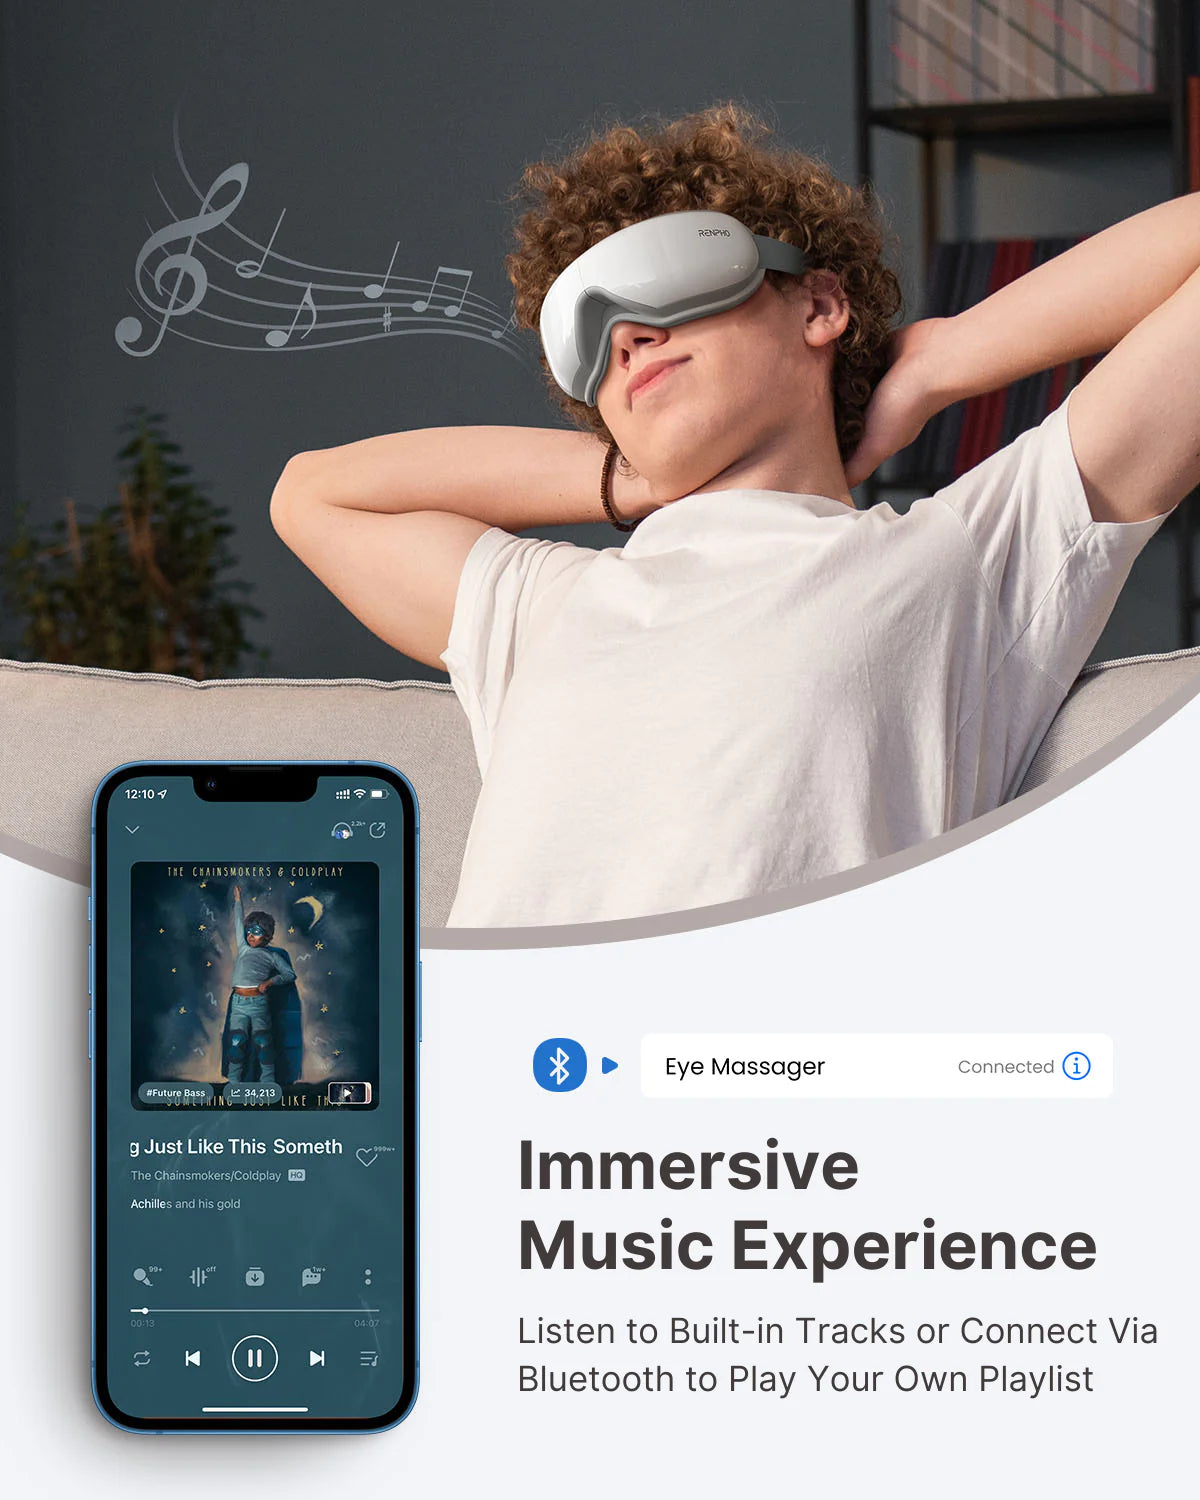 A relaxed young man wearing a white vr headset sits leaning back on a couch, arms behind head. Next to him, a smartphone displays a music app interface labeled "connected - Eyeris 1 Eye Massager," with Renpho EU.